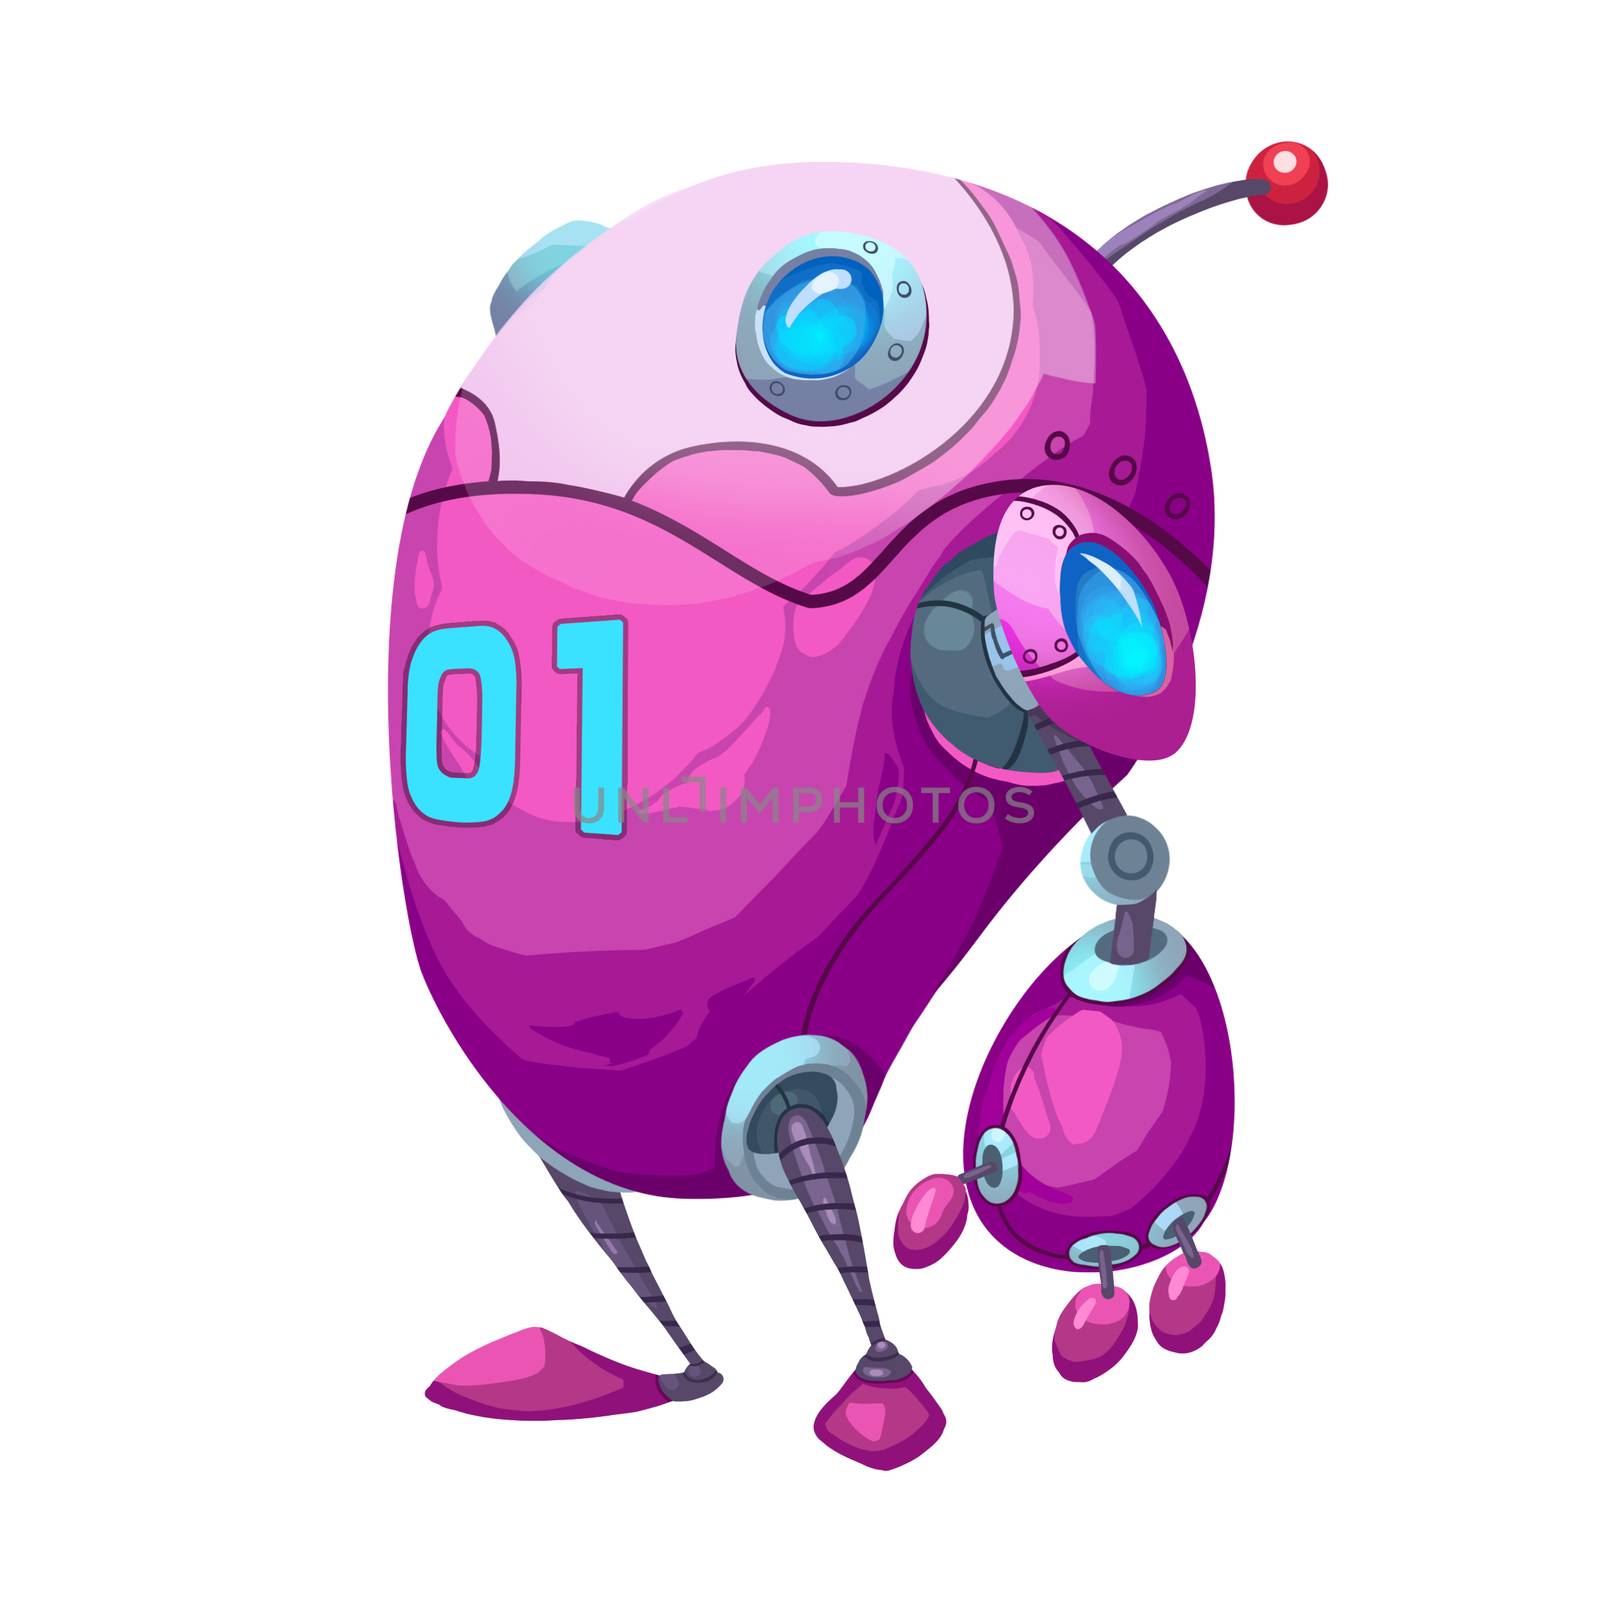 Illustration: The Sport Robot of Jumping Named "Pink Capsule". Element / Character Design. Crazy and Fantasy Future World Topic. Realistic / Cartoon / Fantastic / Sci-fi Style